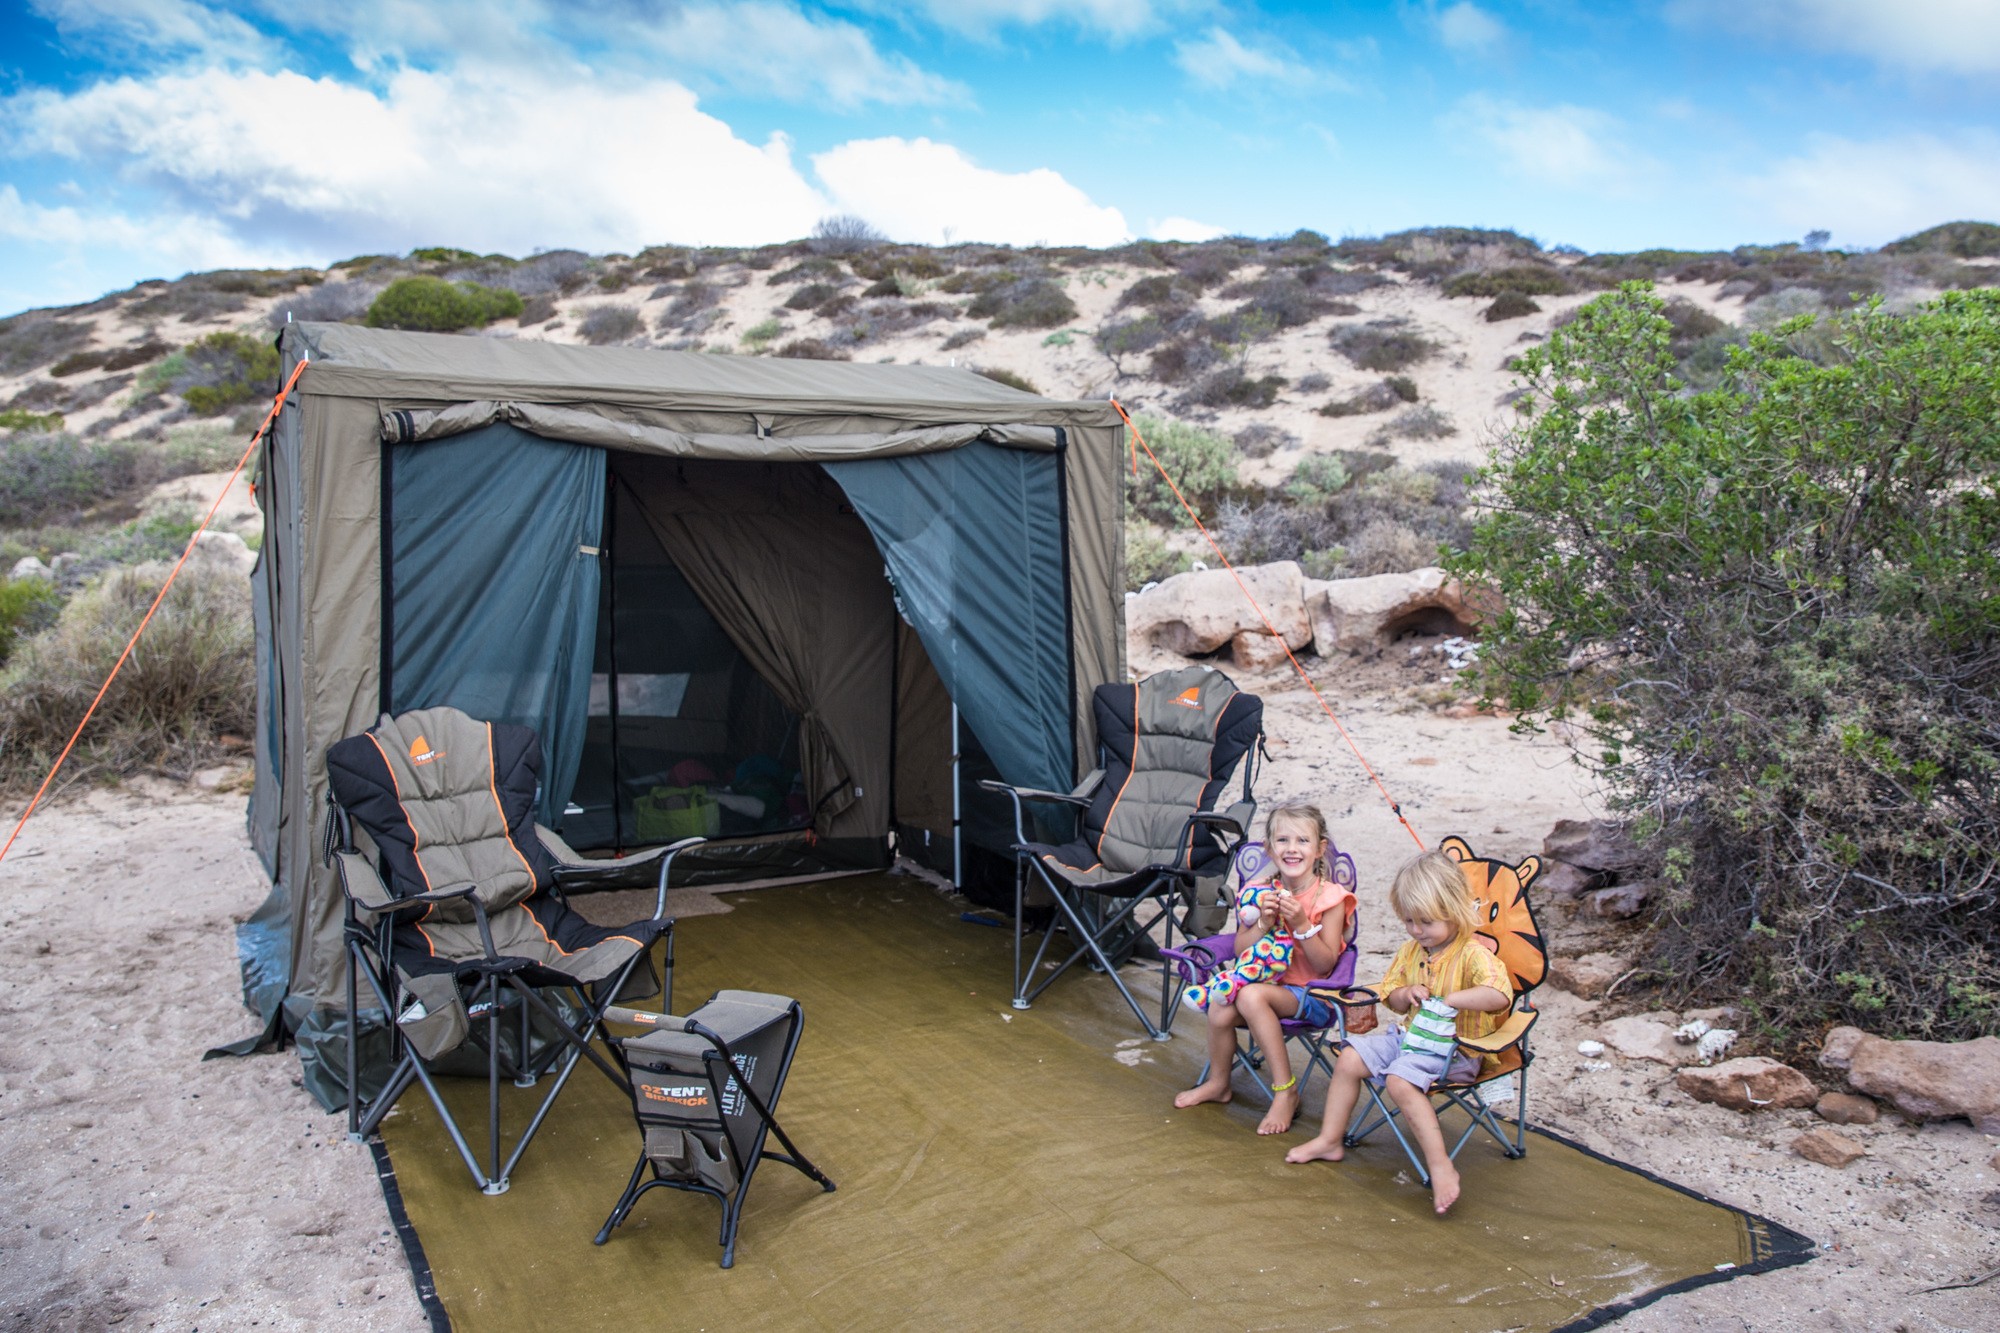 Oztent RV Tents How To Setup In 30 Seconds | eduaspirant.com